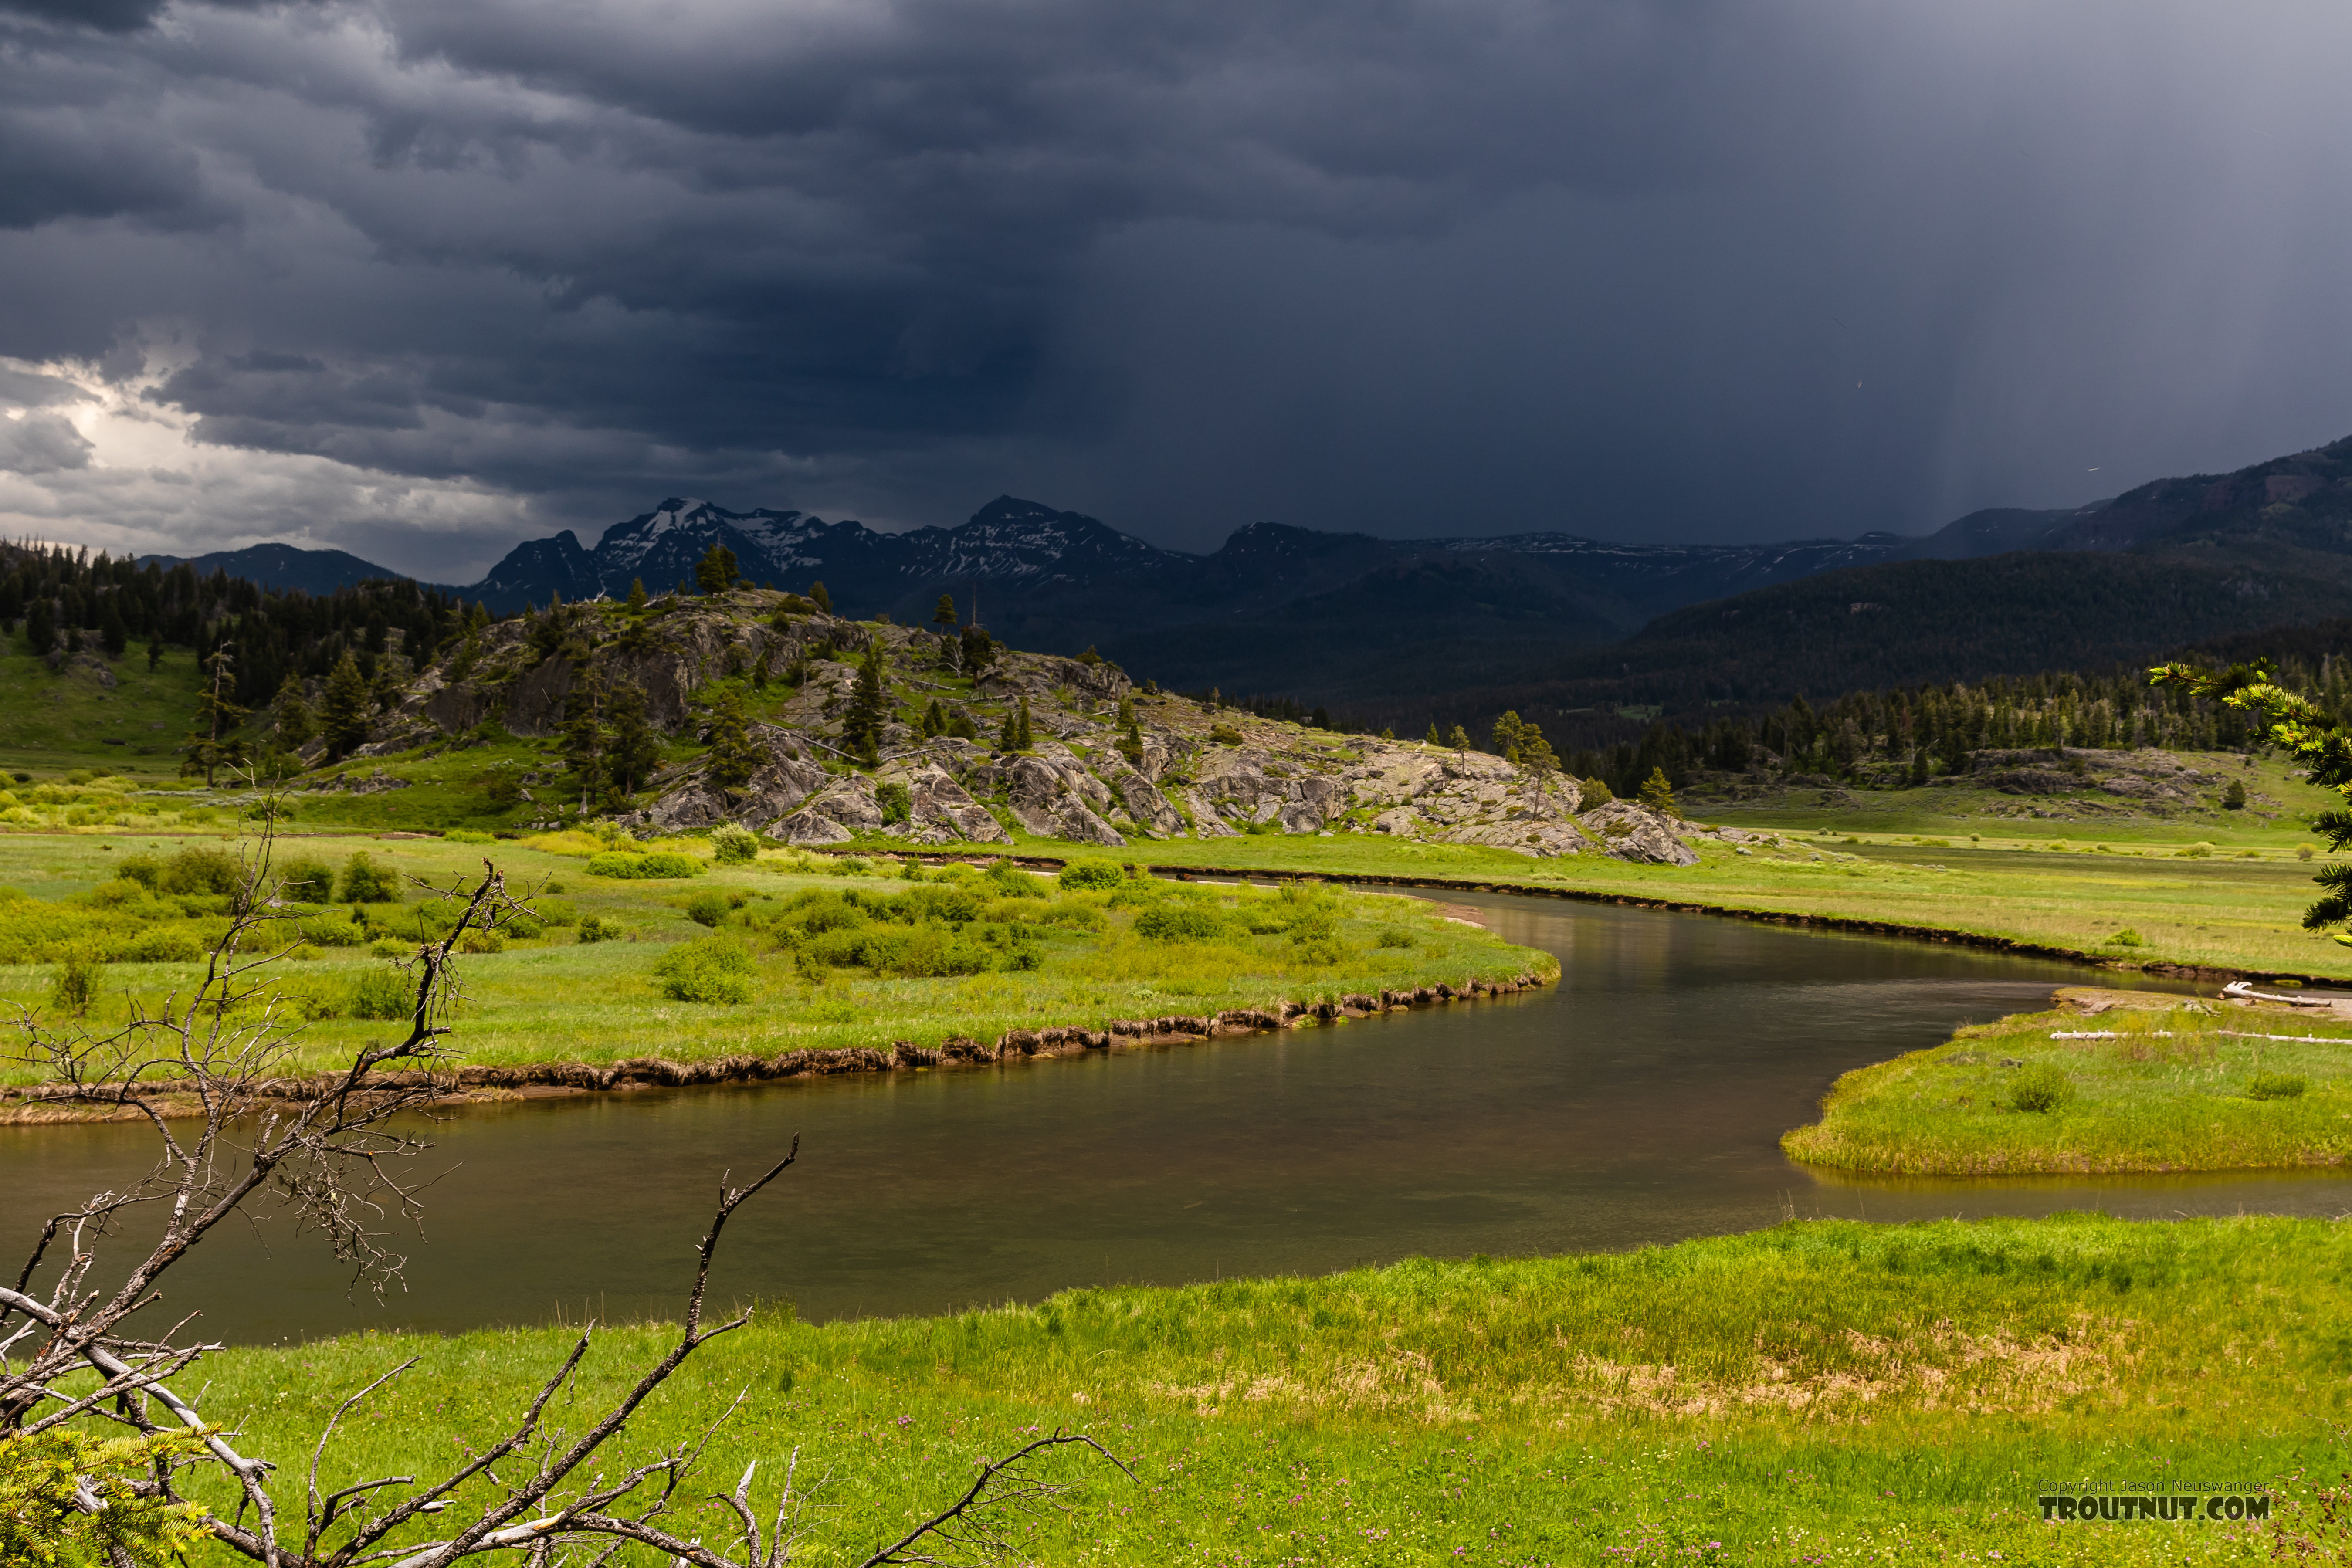 We were lucky to be able to fish through this storm as it skirted around us to the north, giving us just enough clouds to prompt a BWO hatch but keeping the lighting at a safe distance. From Slough Creek in Wyoming.